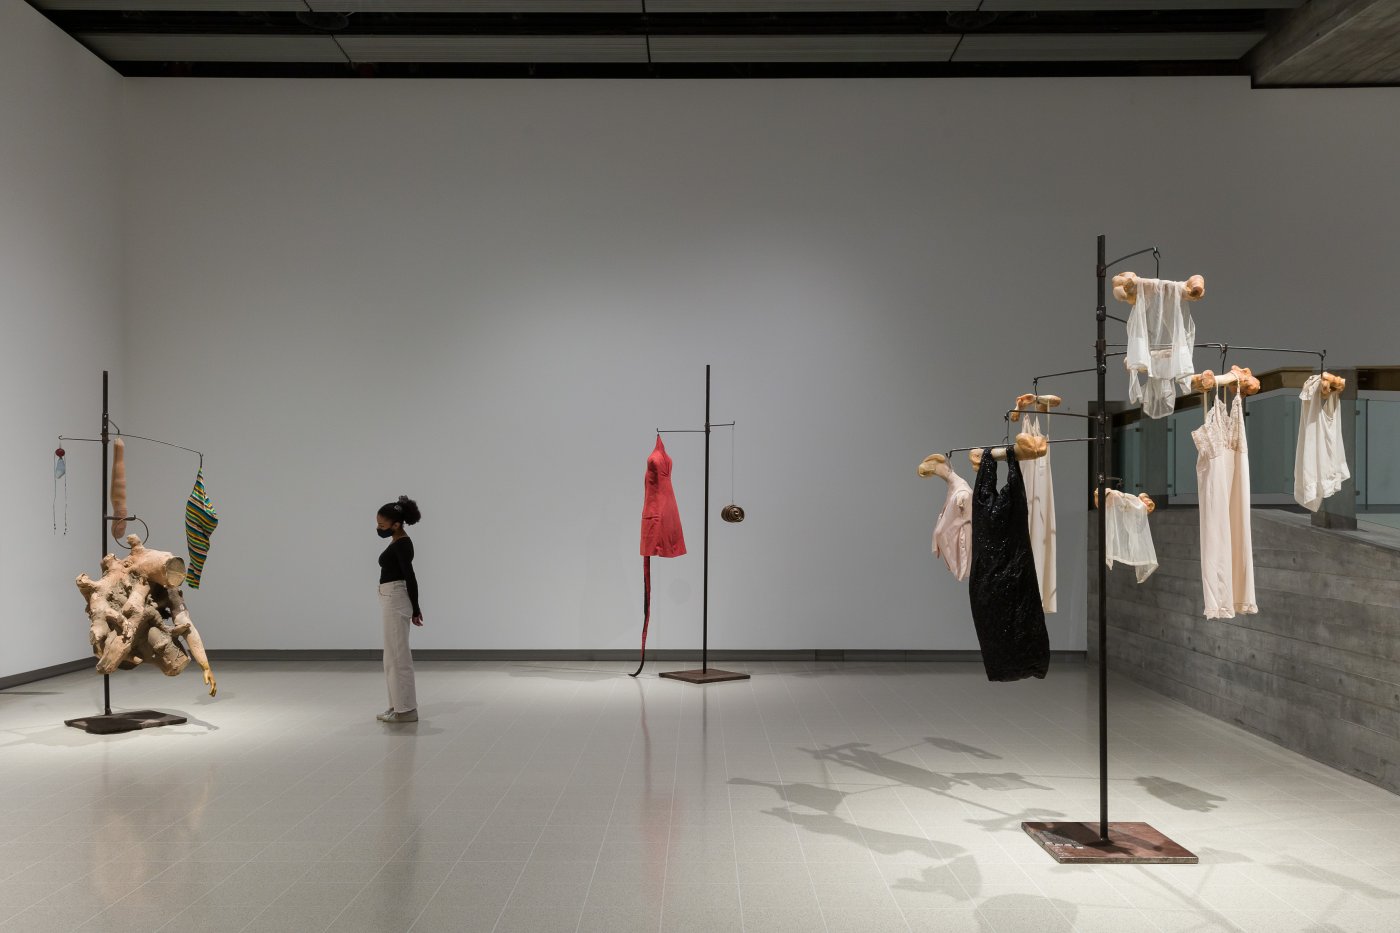 Installation image for Louise Bourgeois: The Woven Child, at Hayward Gallery